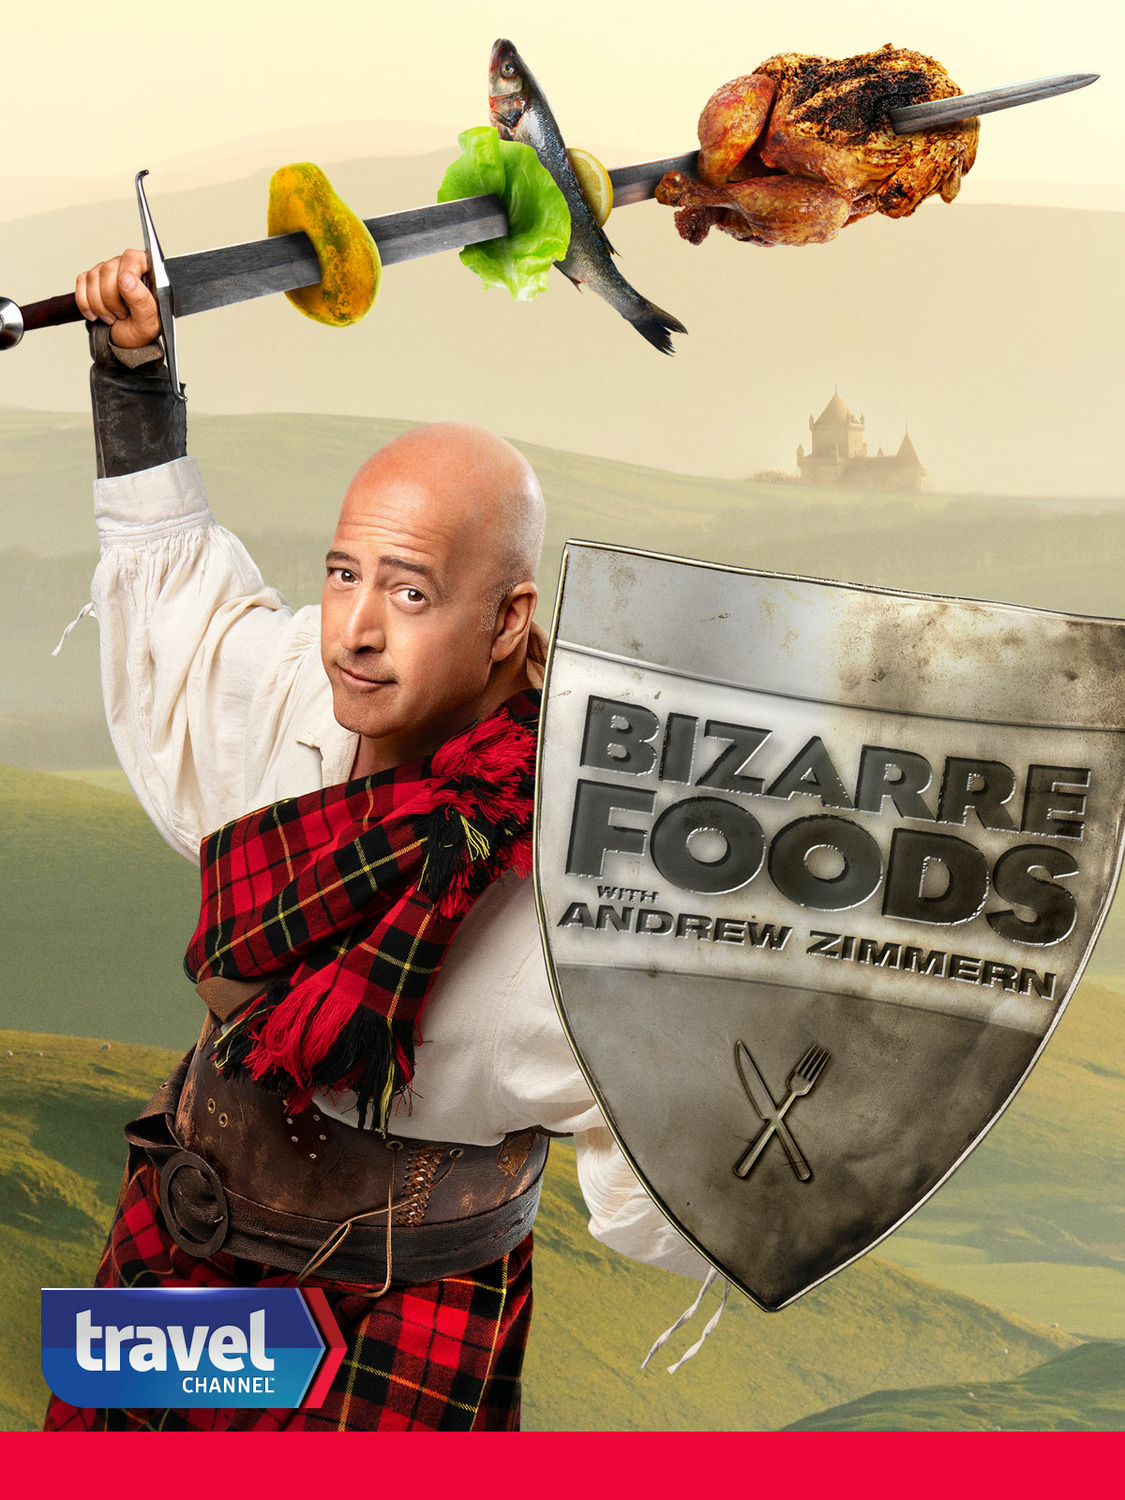 Extra Large TV Poster Image for Bizarre Foods with Andrew Zimmern (#9 of 10)